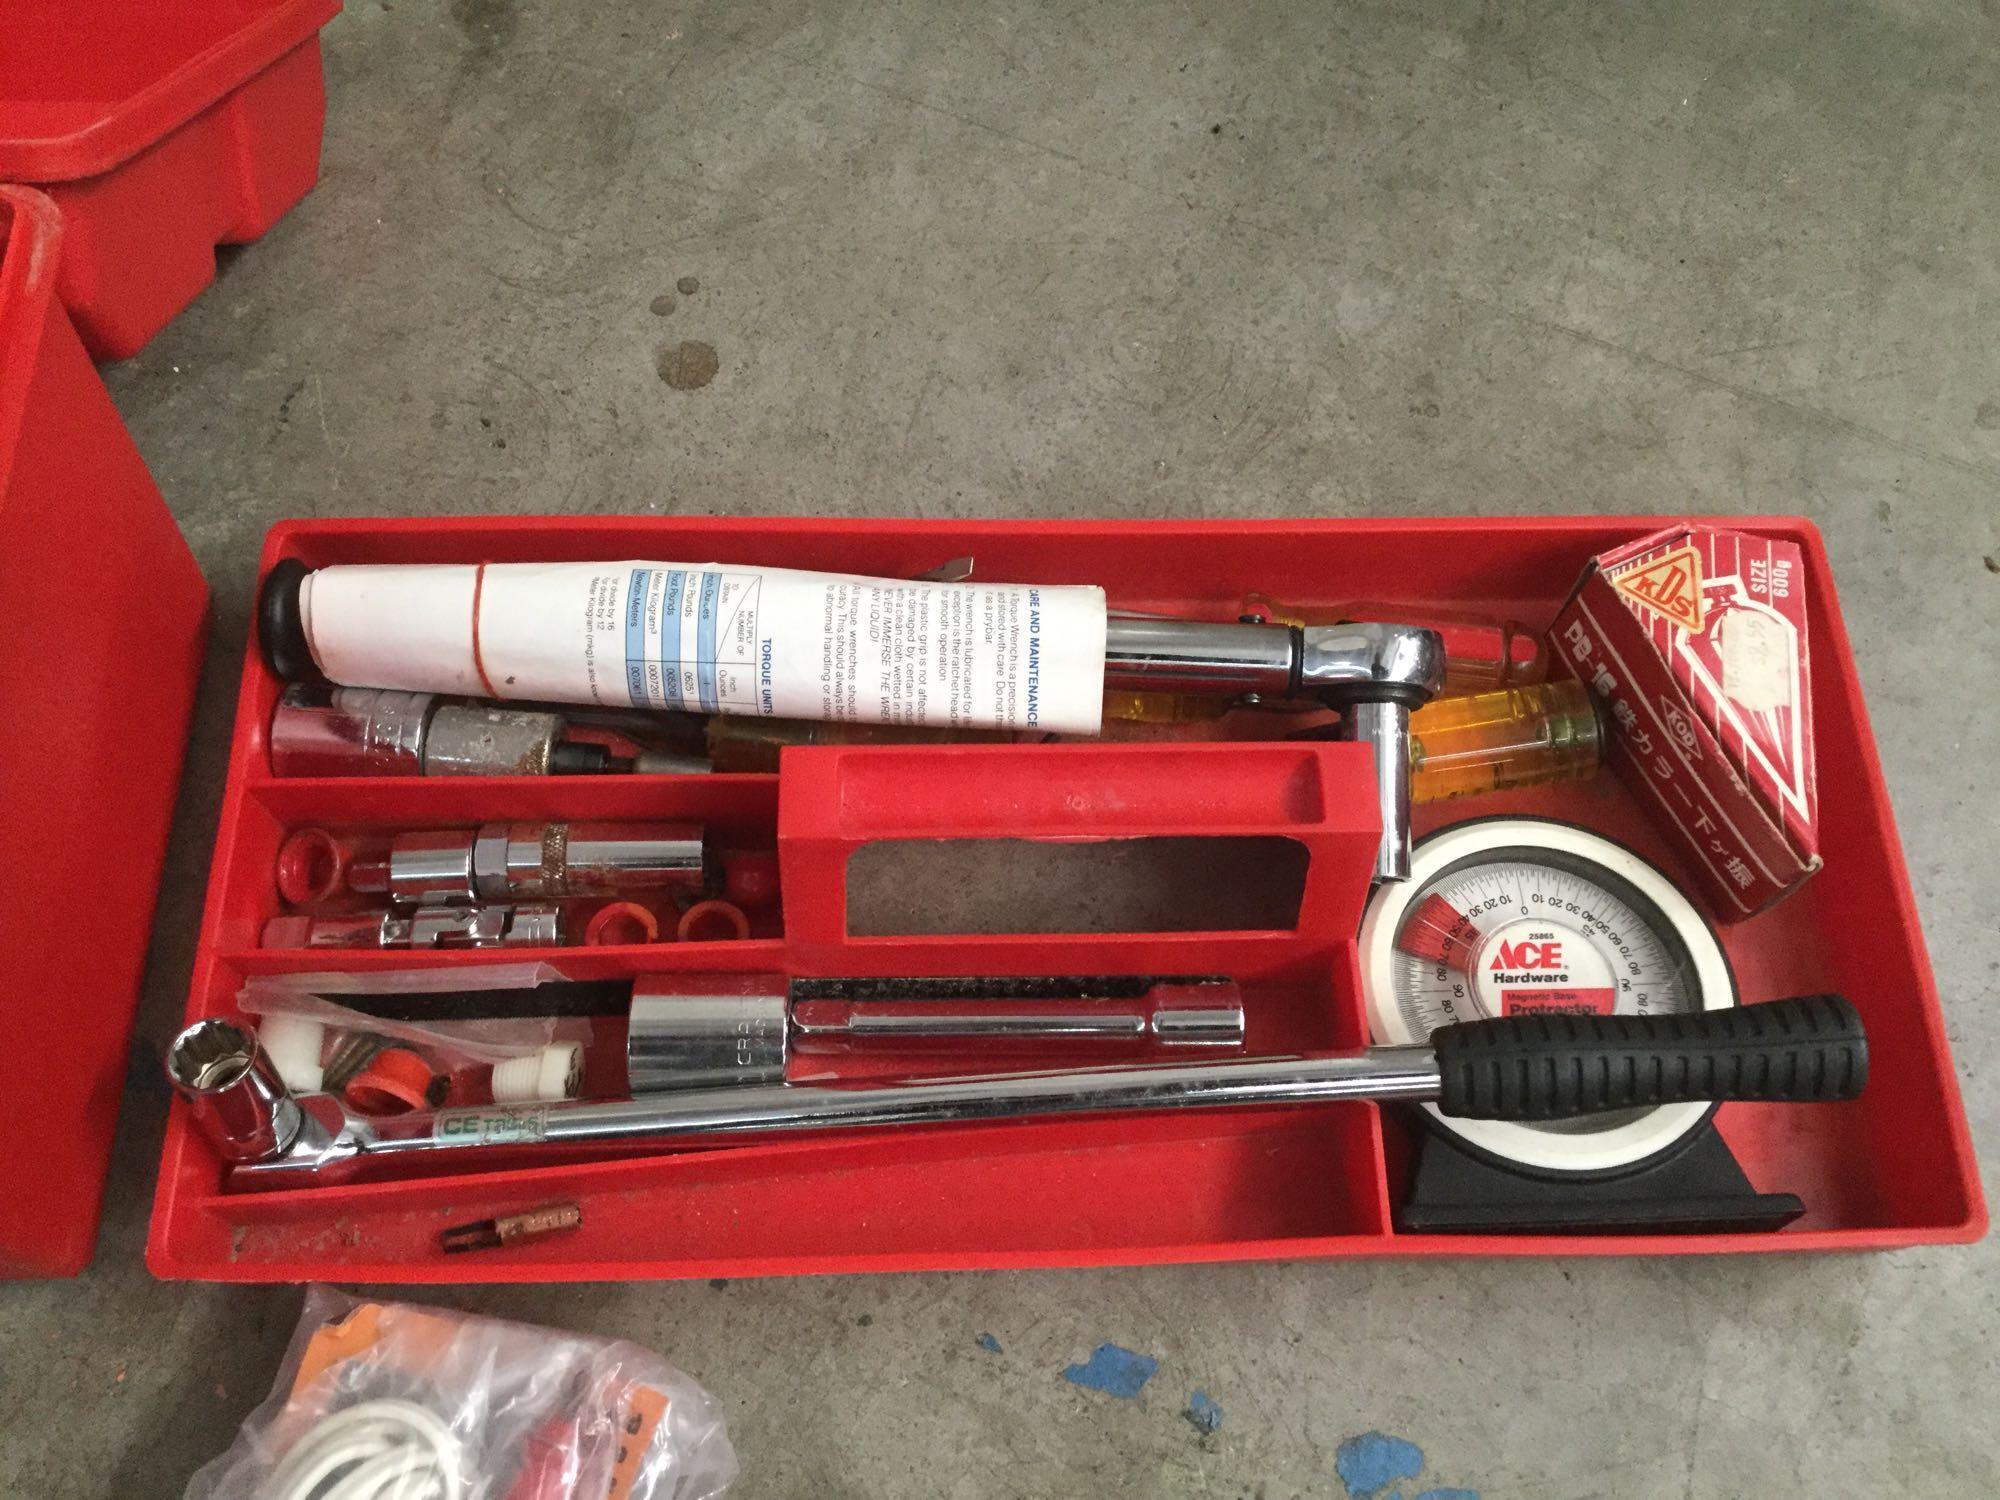 Plastic tuff box full of hammers, wrenches, planer, etc see pics